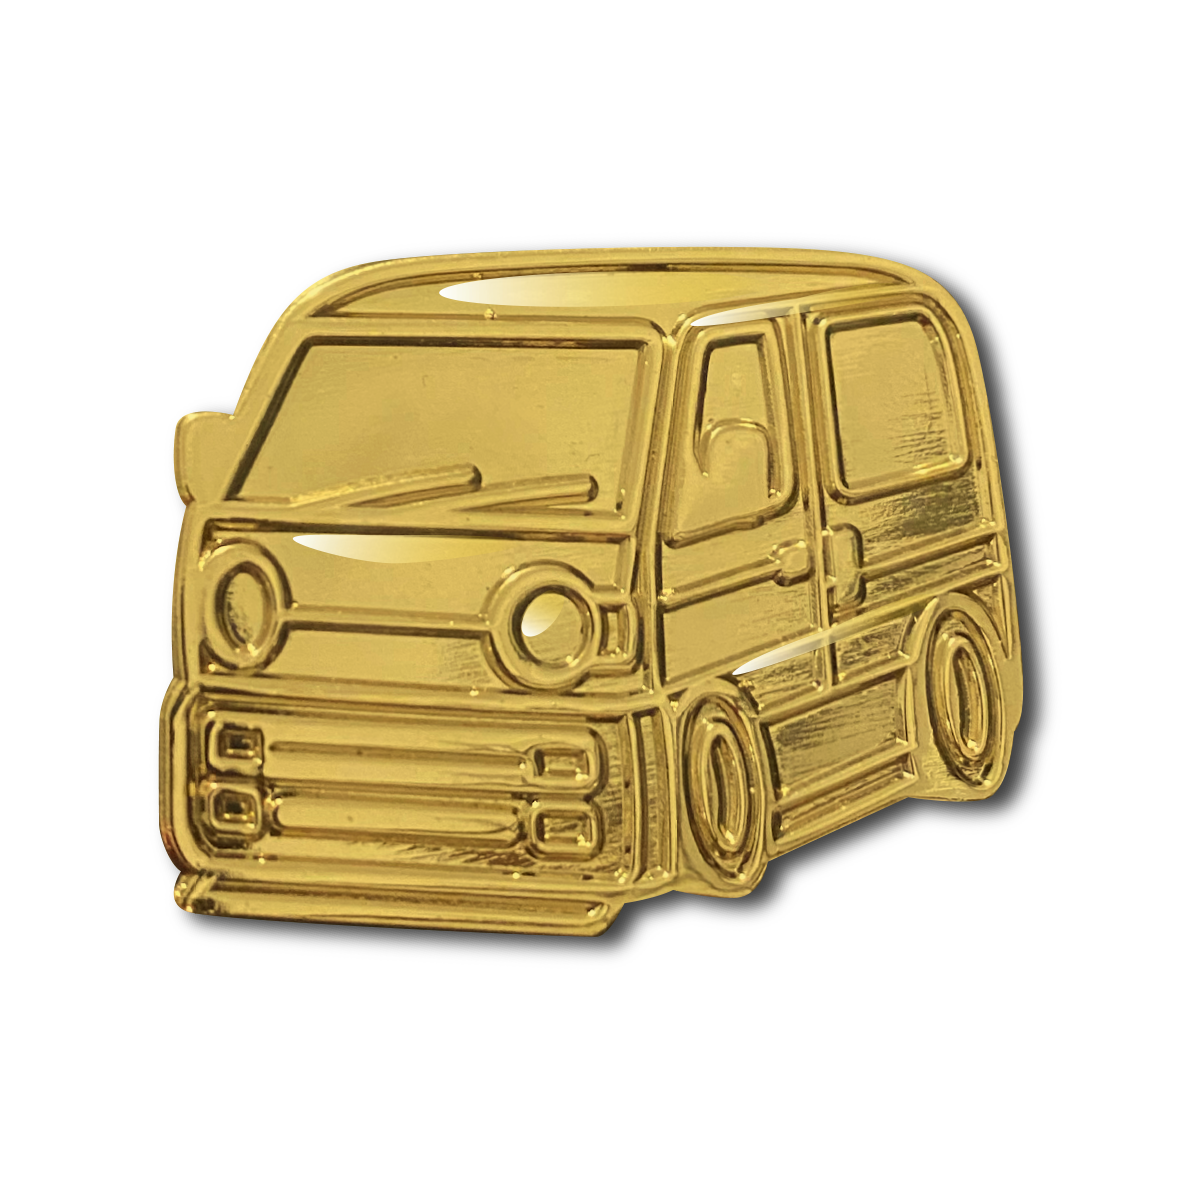 Golden Carry Metal Collectible Pin